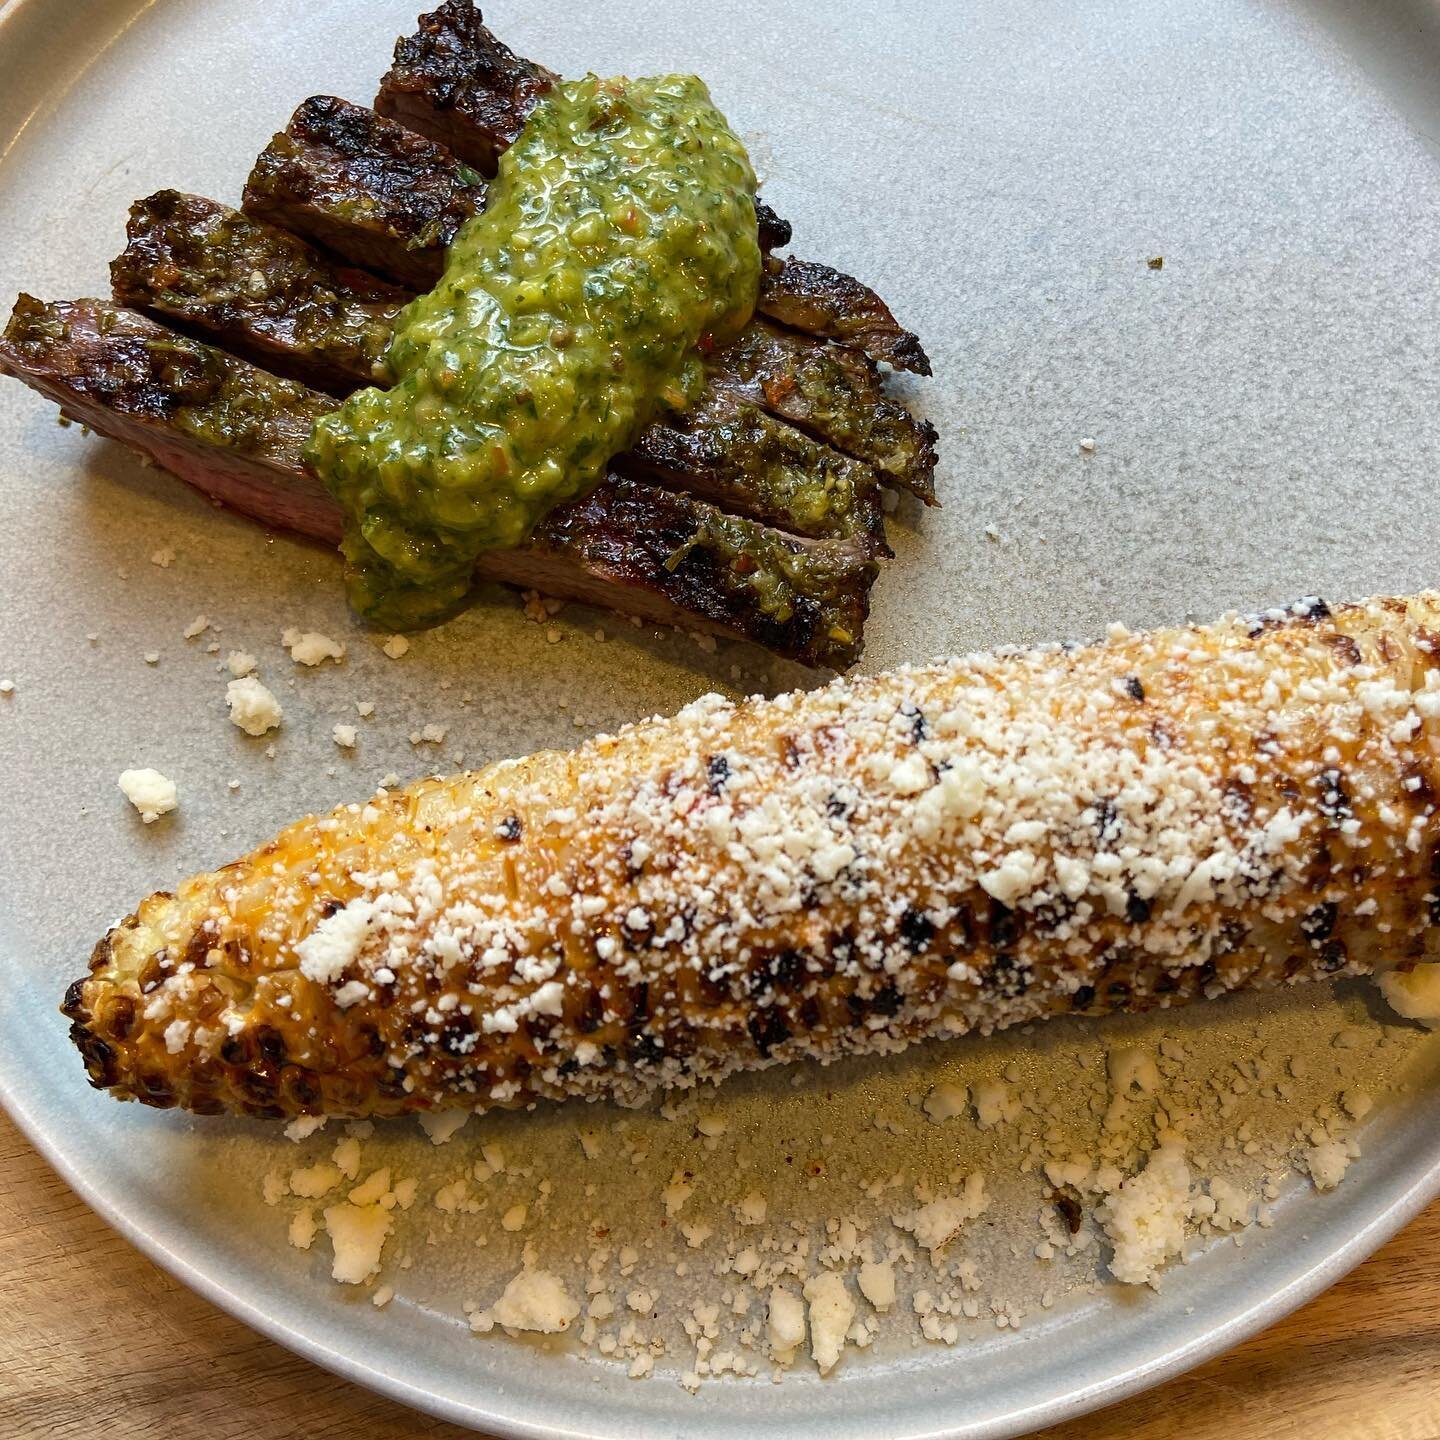 Saturday dinner. Beautiful corn from @marinichristmas served as grilled Mexican street corn with spicy Mayo, Chili pepper and Cotija cheese - so amazing! Oh and a supporting act by some chimichurri marinated flat iron steak. #dinner #saturdaydinner #